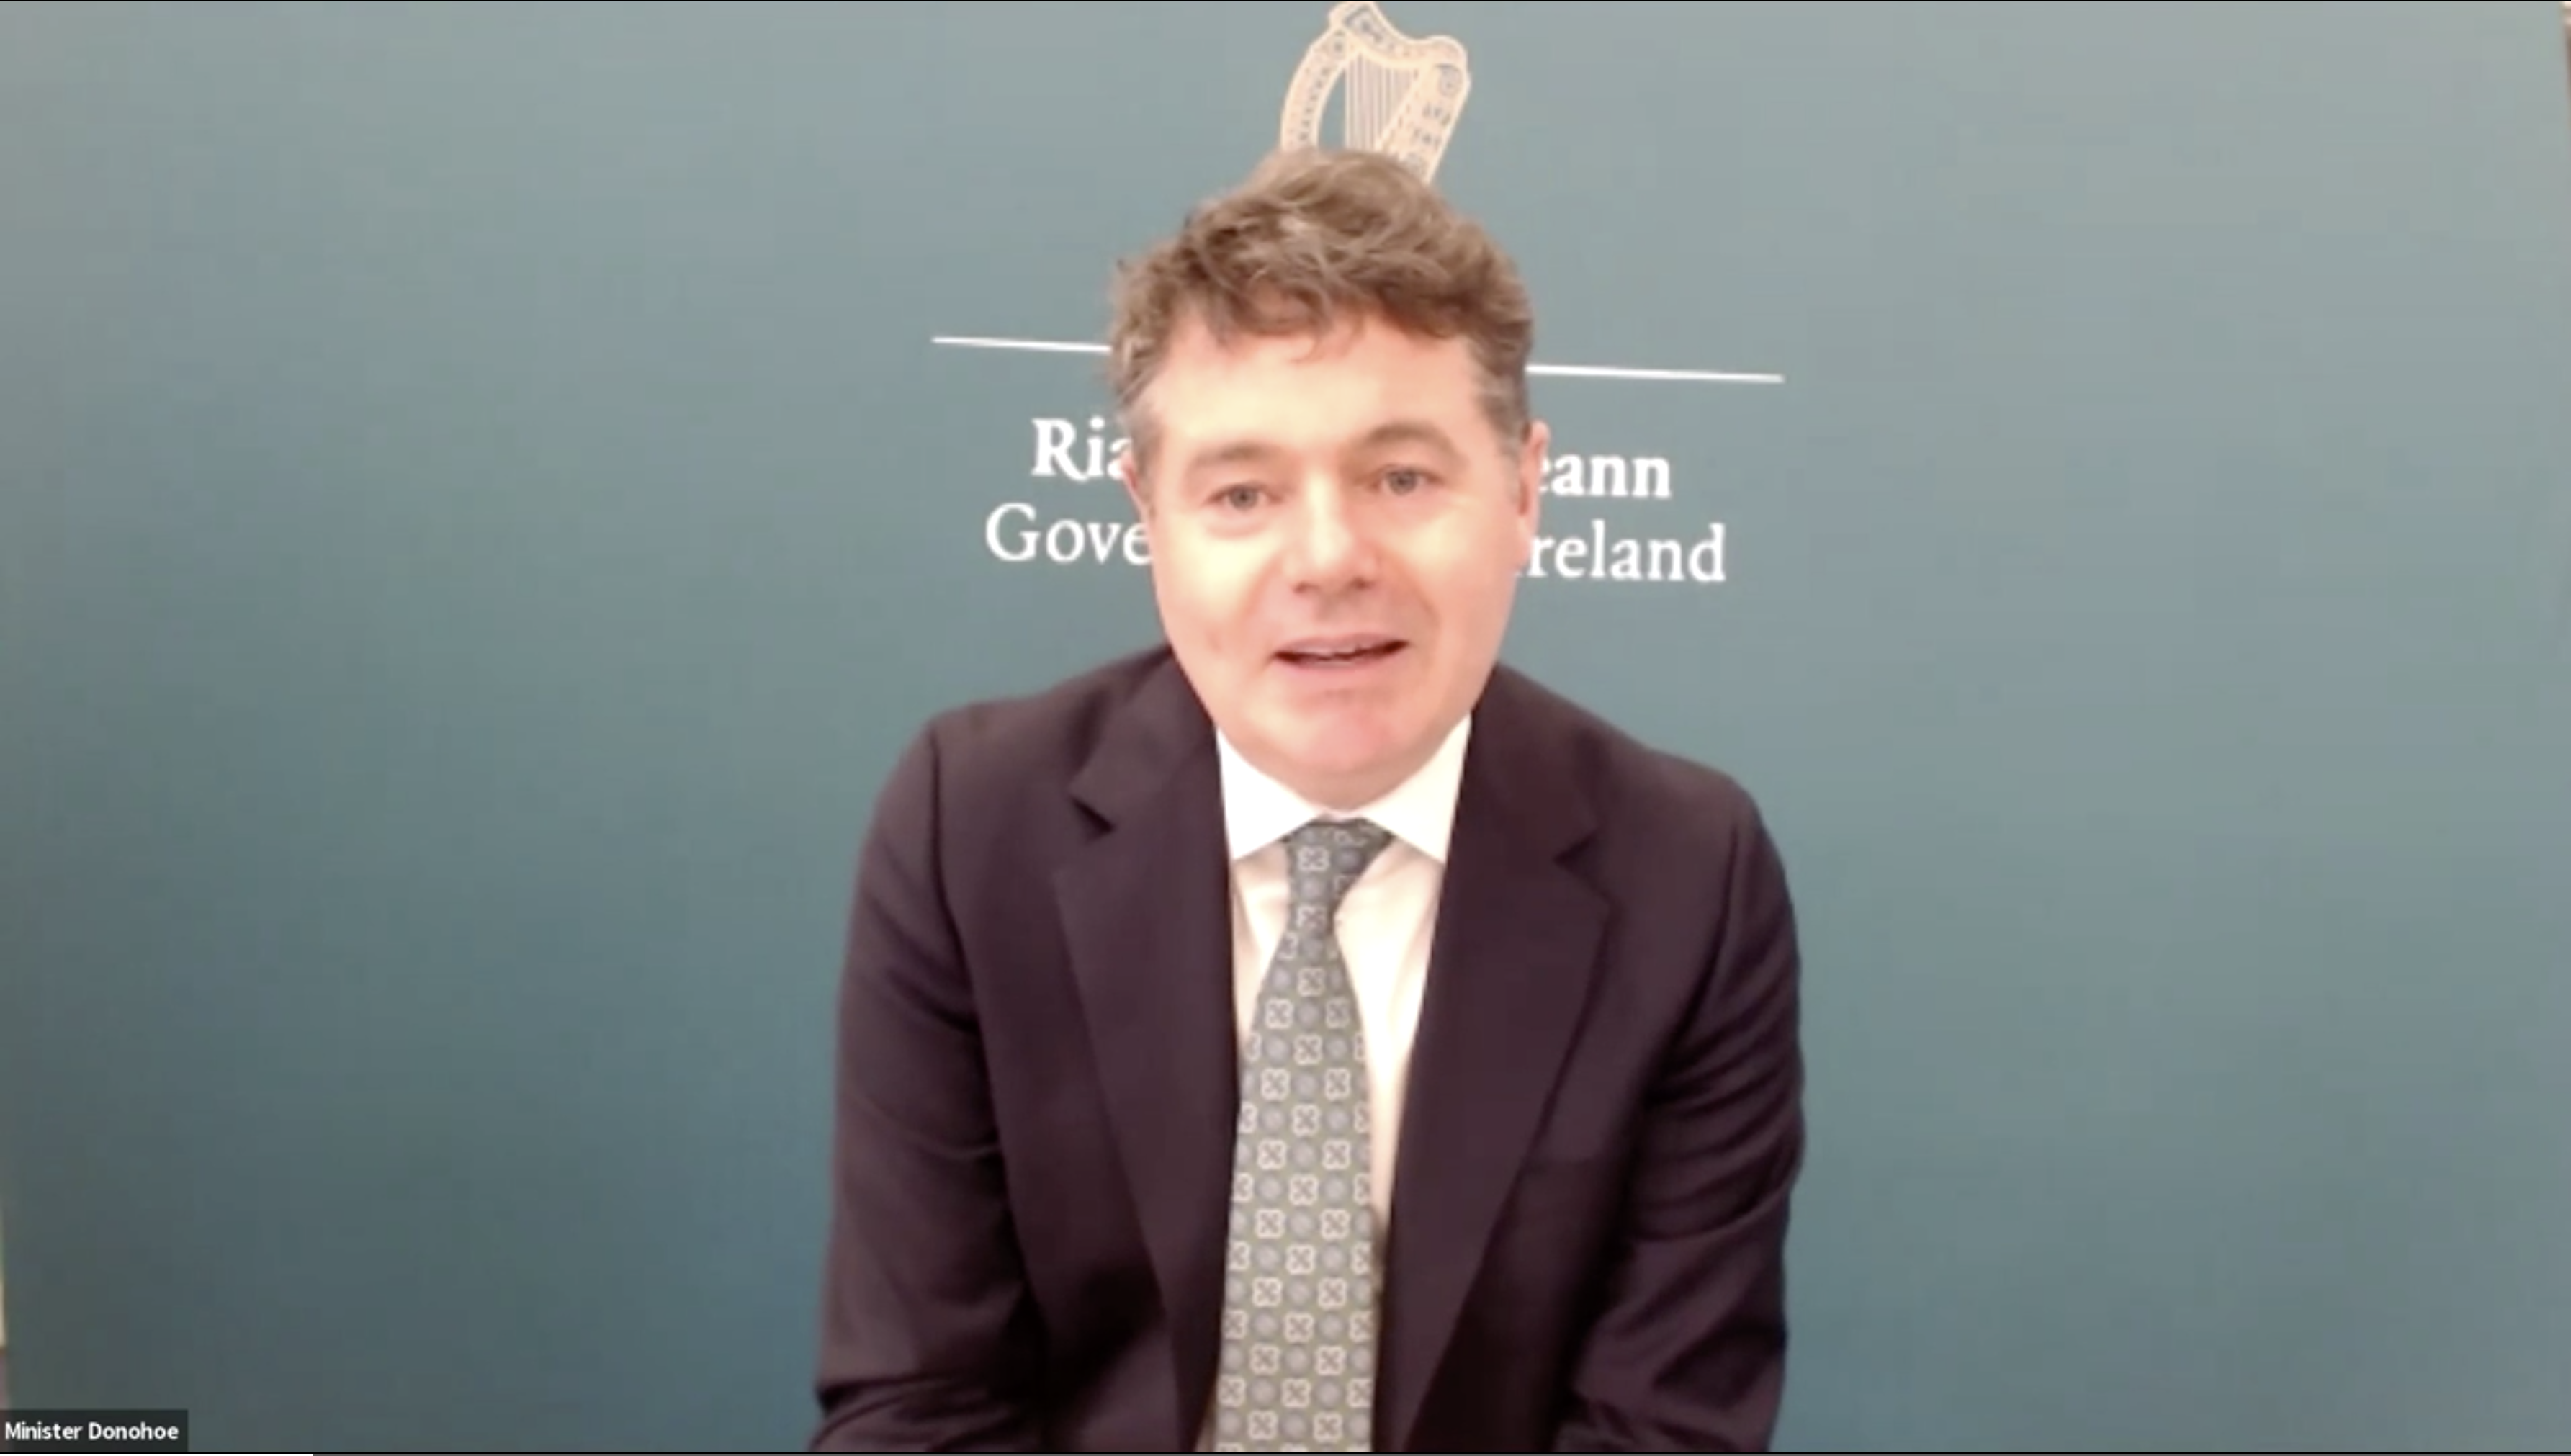 Conversation with Ireland's Minister for Finance, Paschal Donohoe, TD